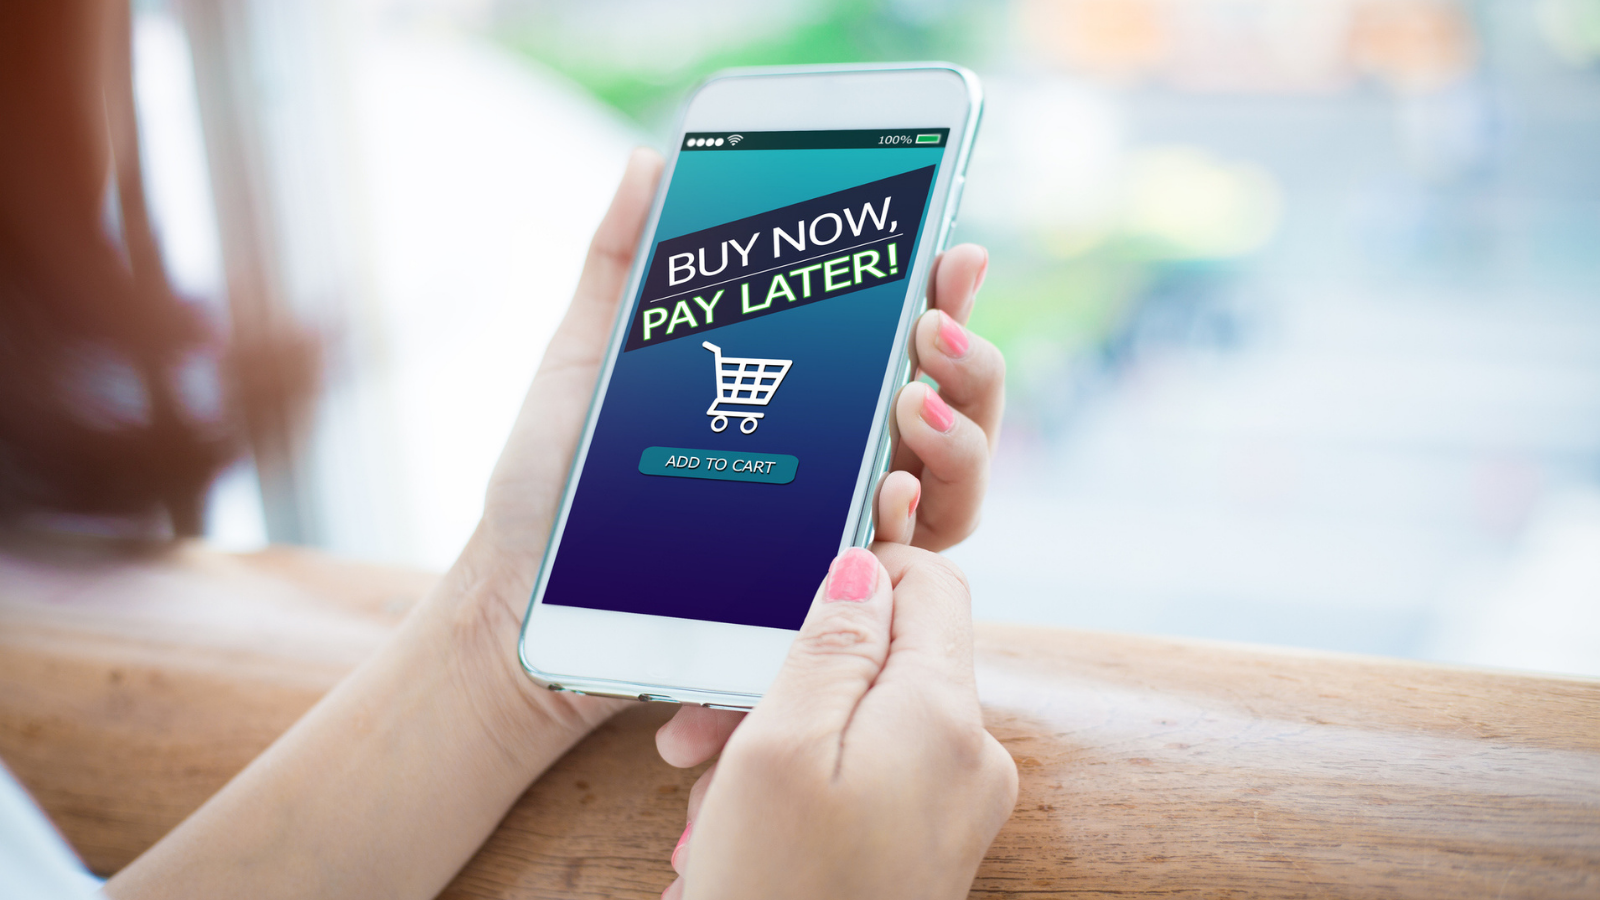 Smartphone and Buy Now, Pay Later app